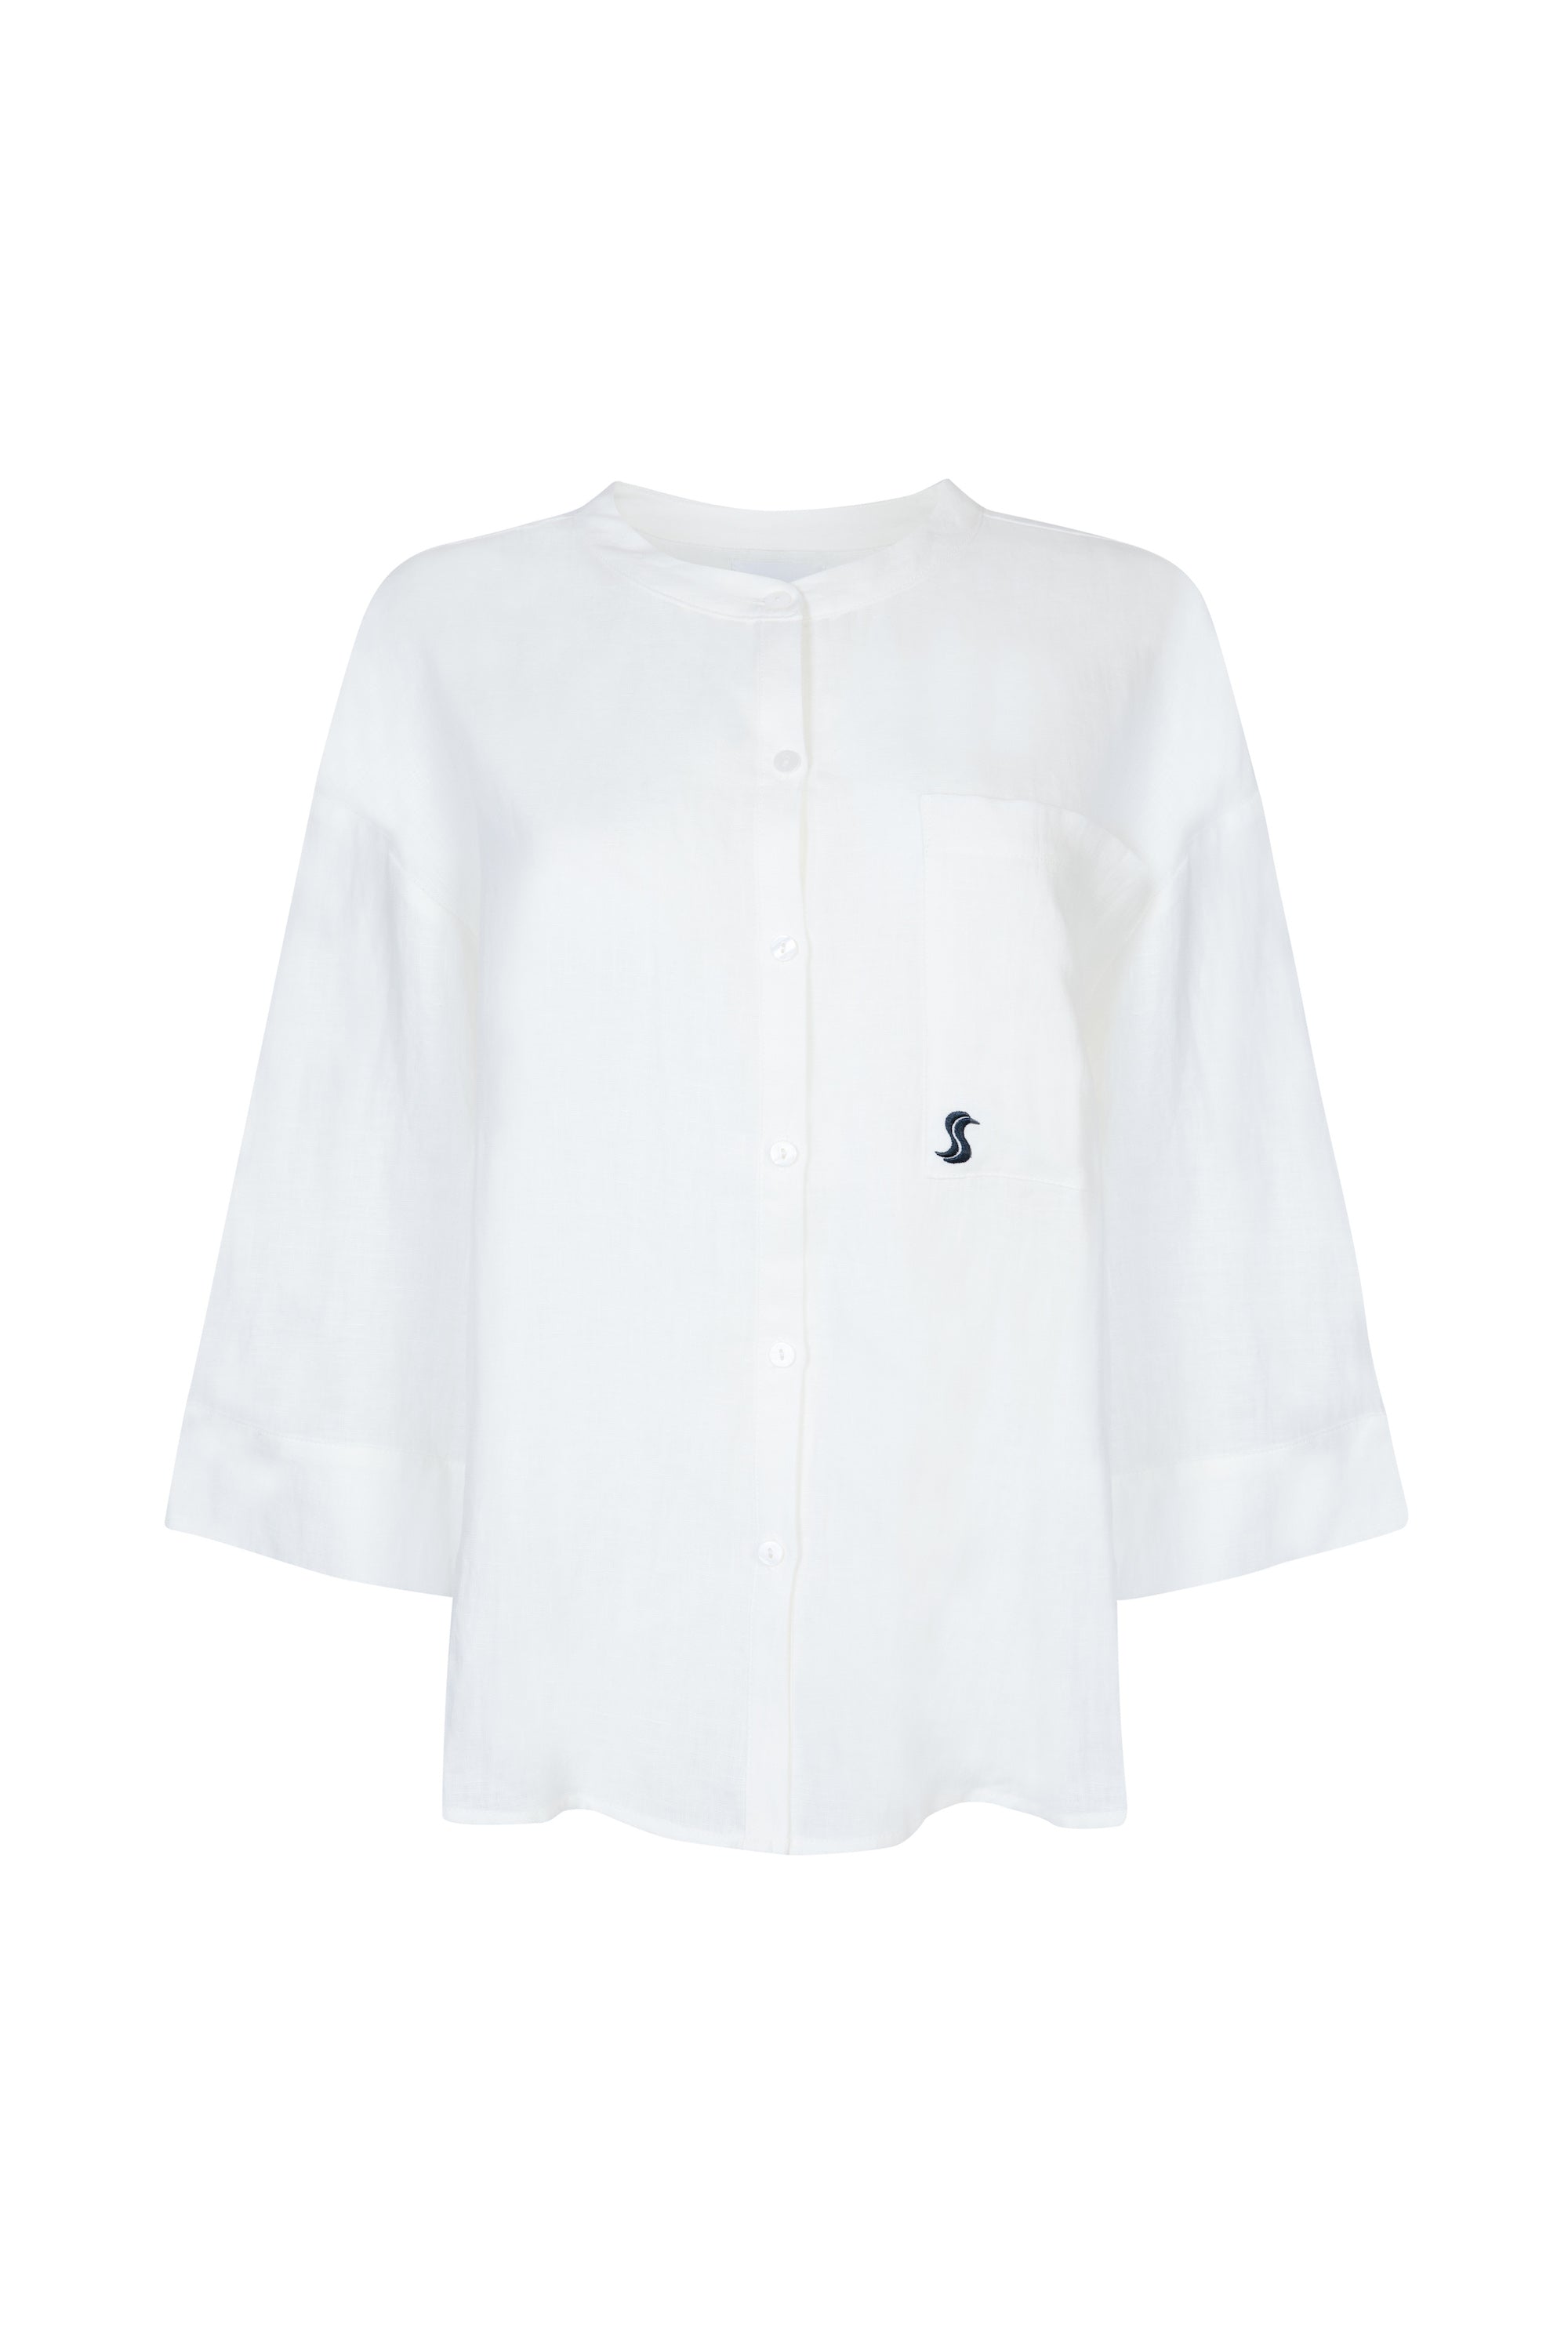 'ANDREA' EMBROIDERED LINEN SHIRT - OFF WHITE